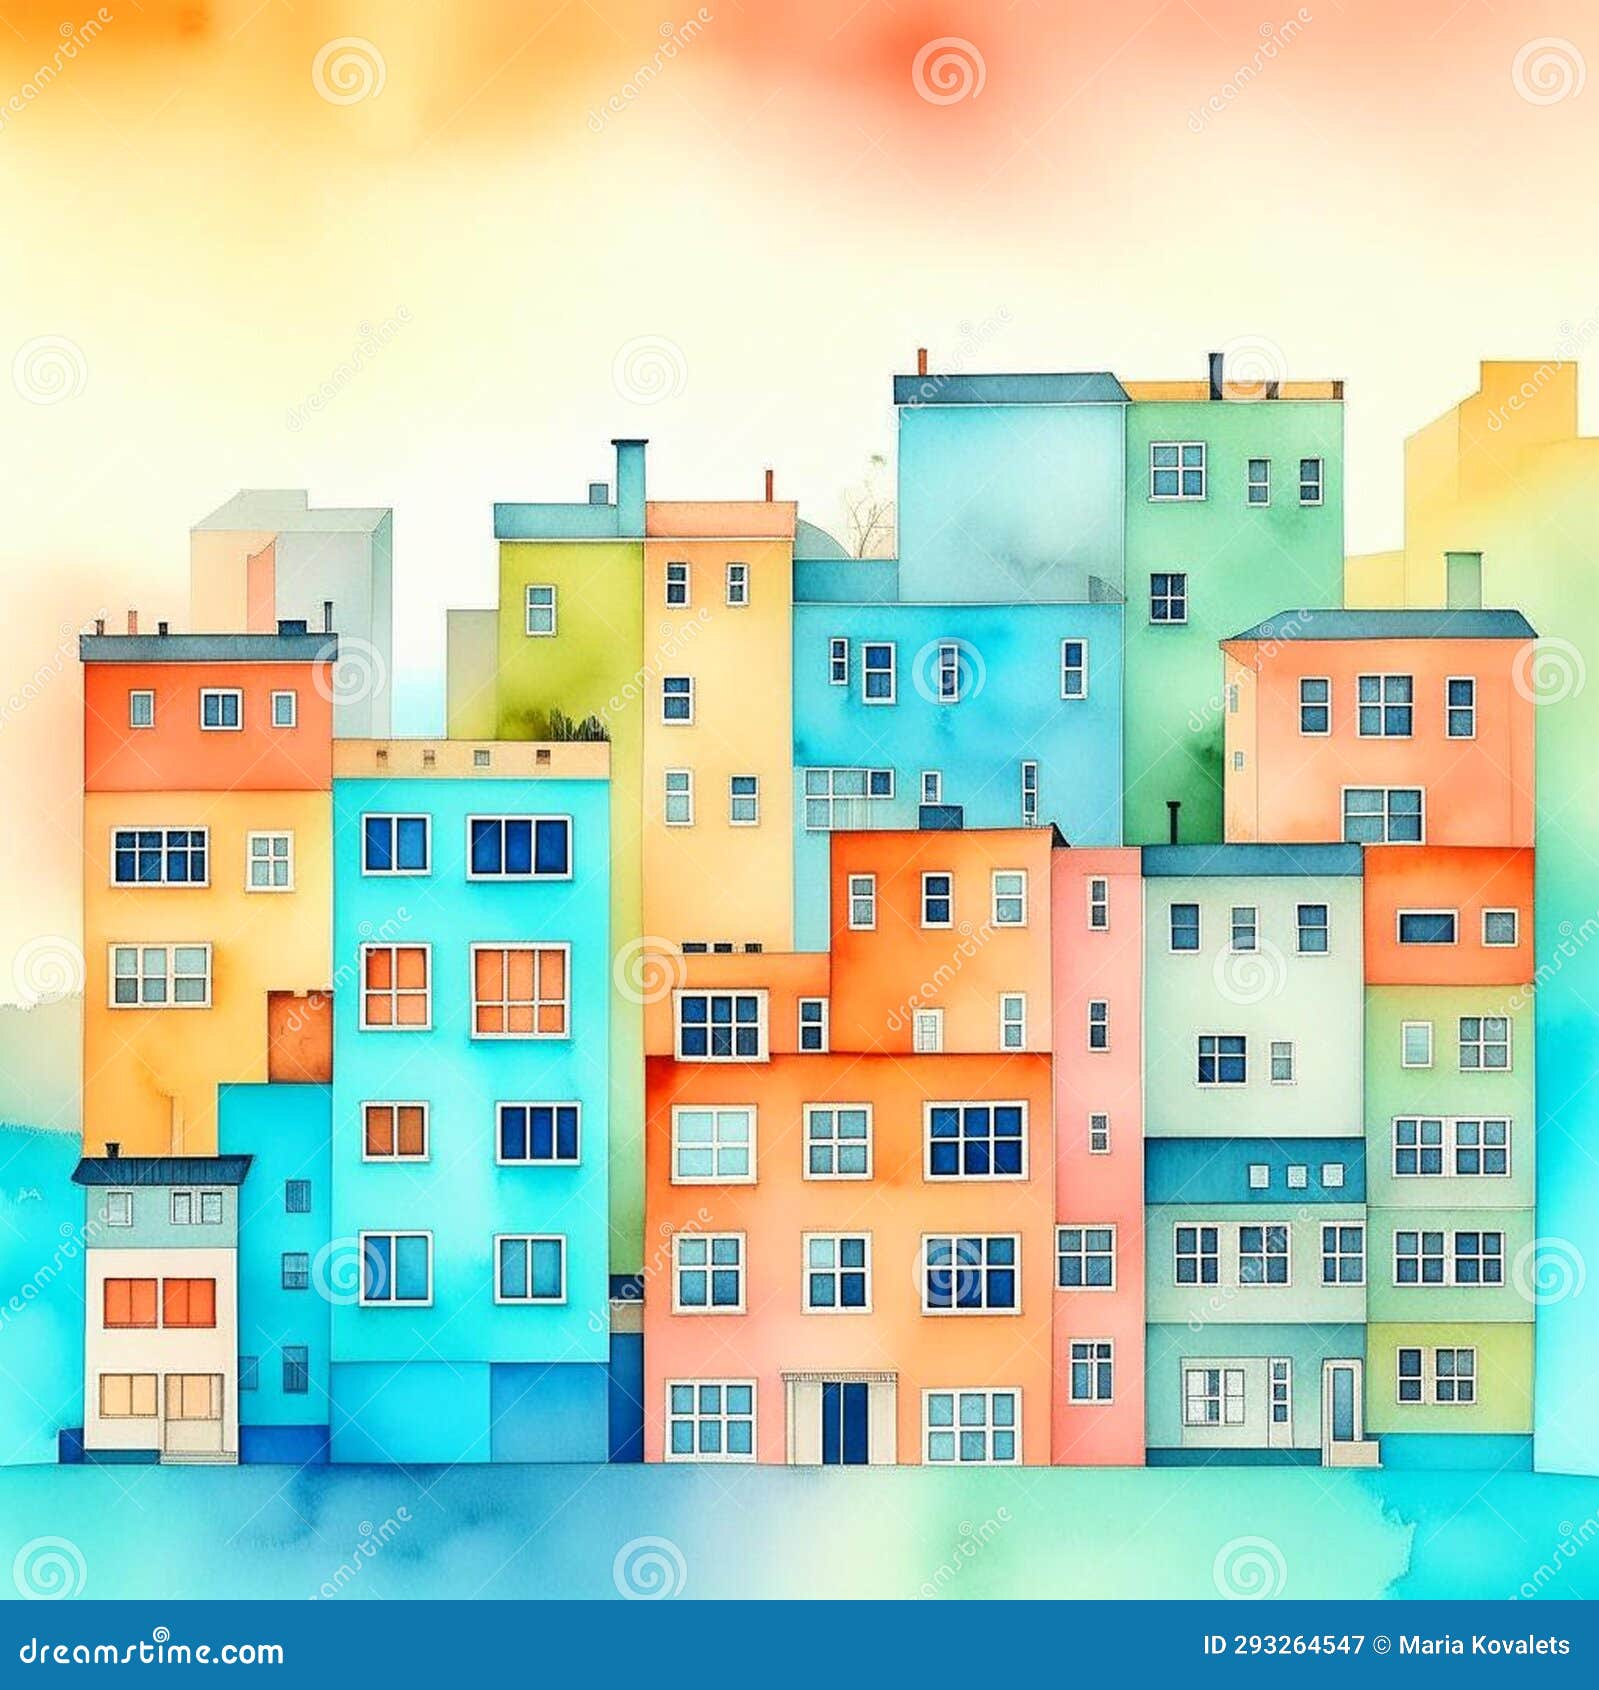 Abstract Buildings in City on Watercolor Painting. City Scape ...